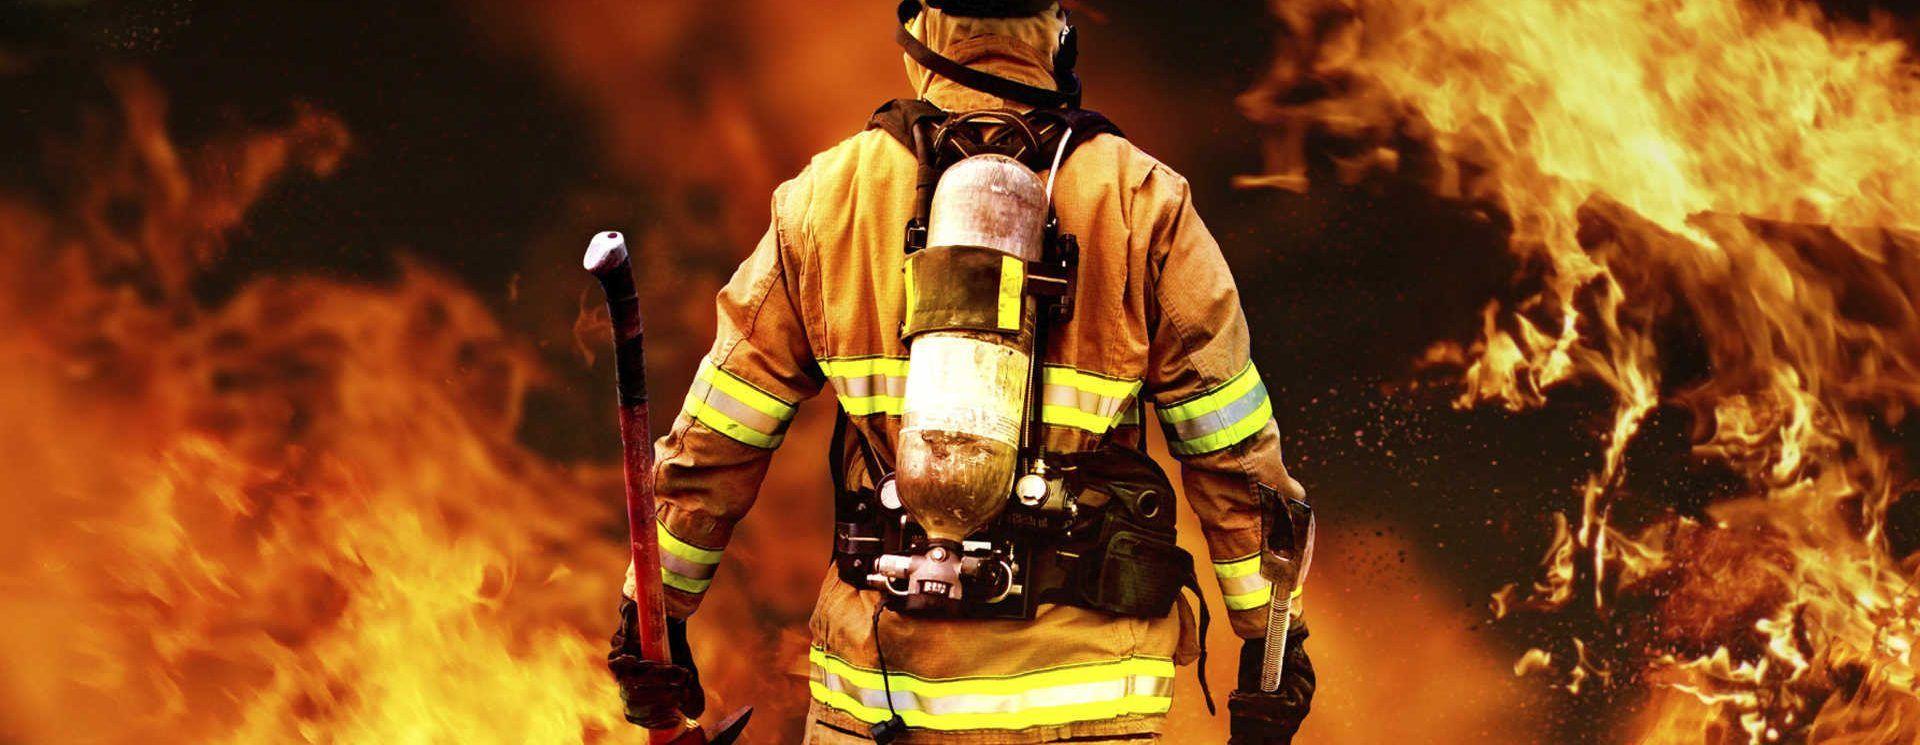 Cropped Firefighter Wallpaper